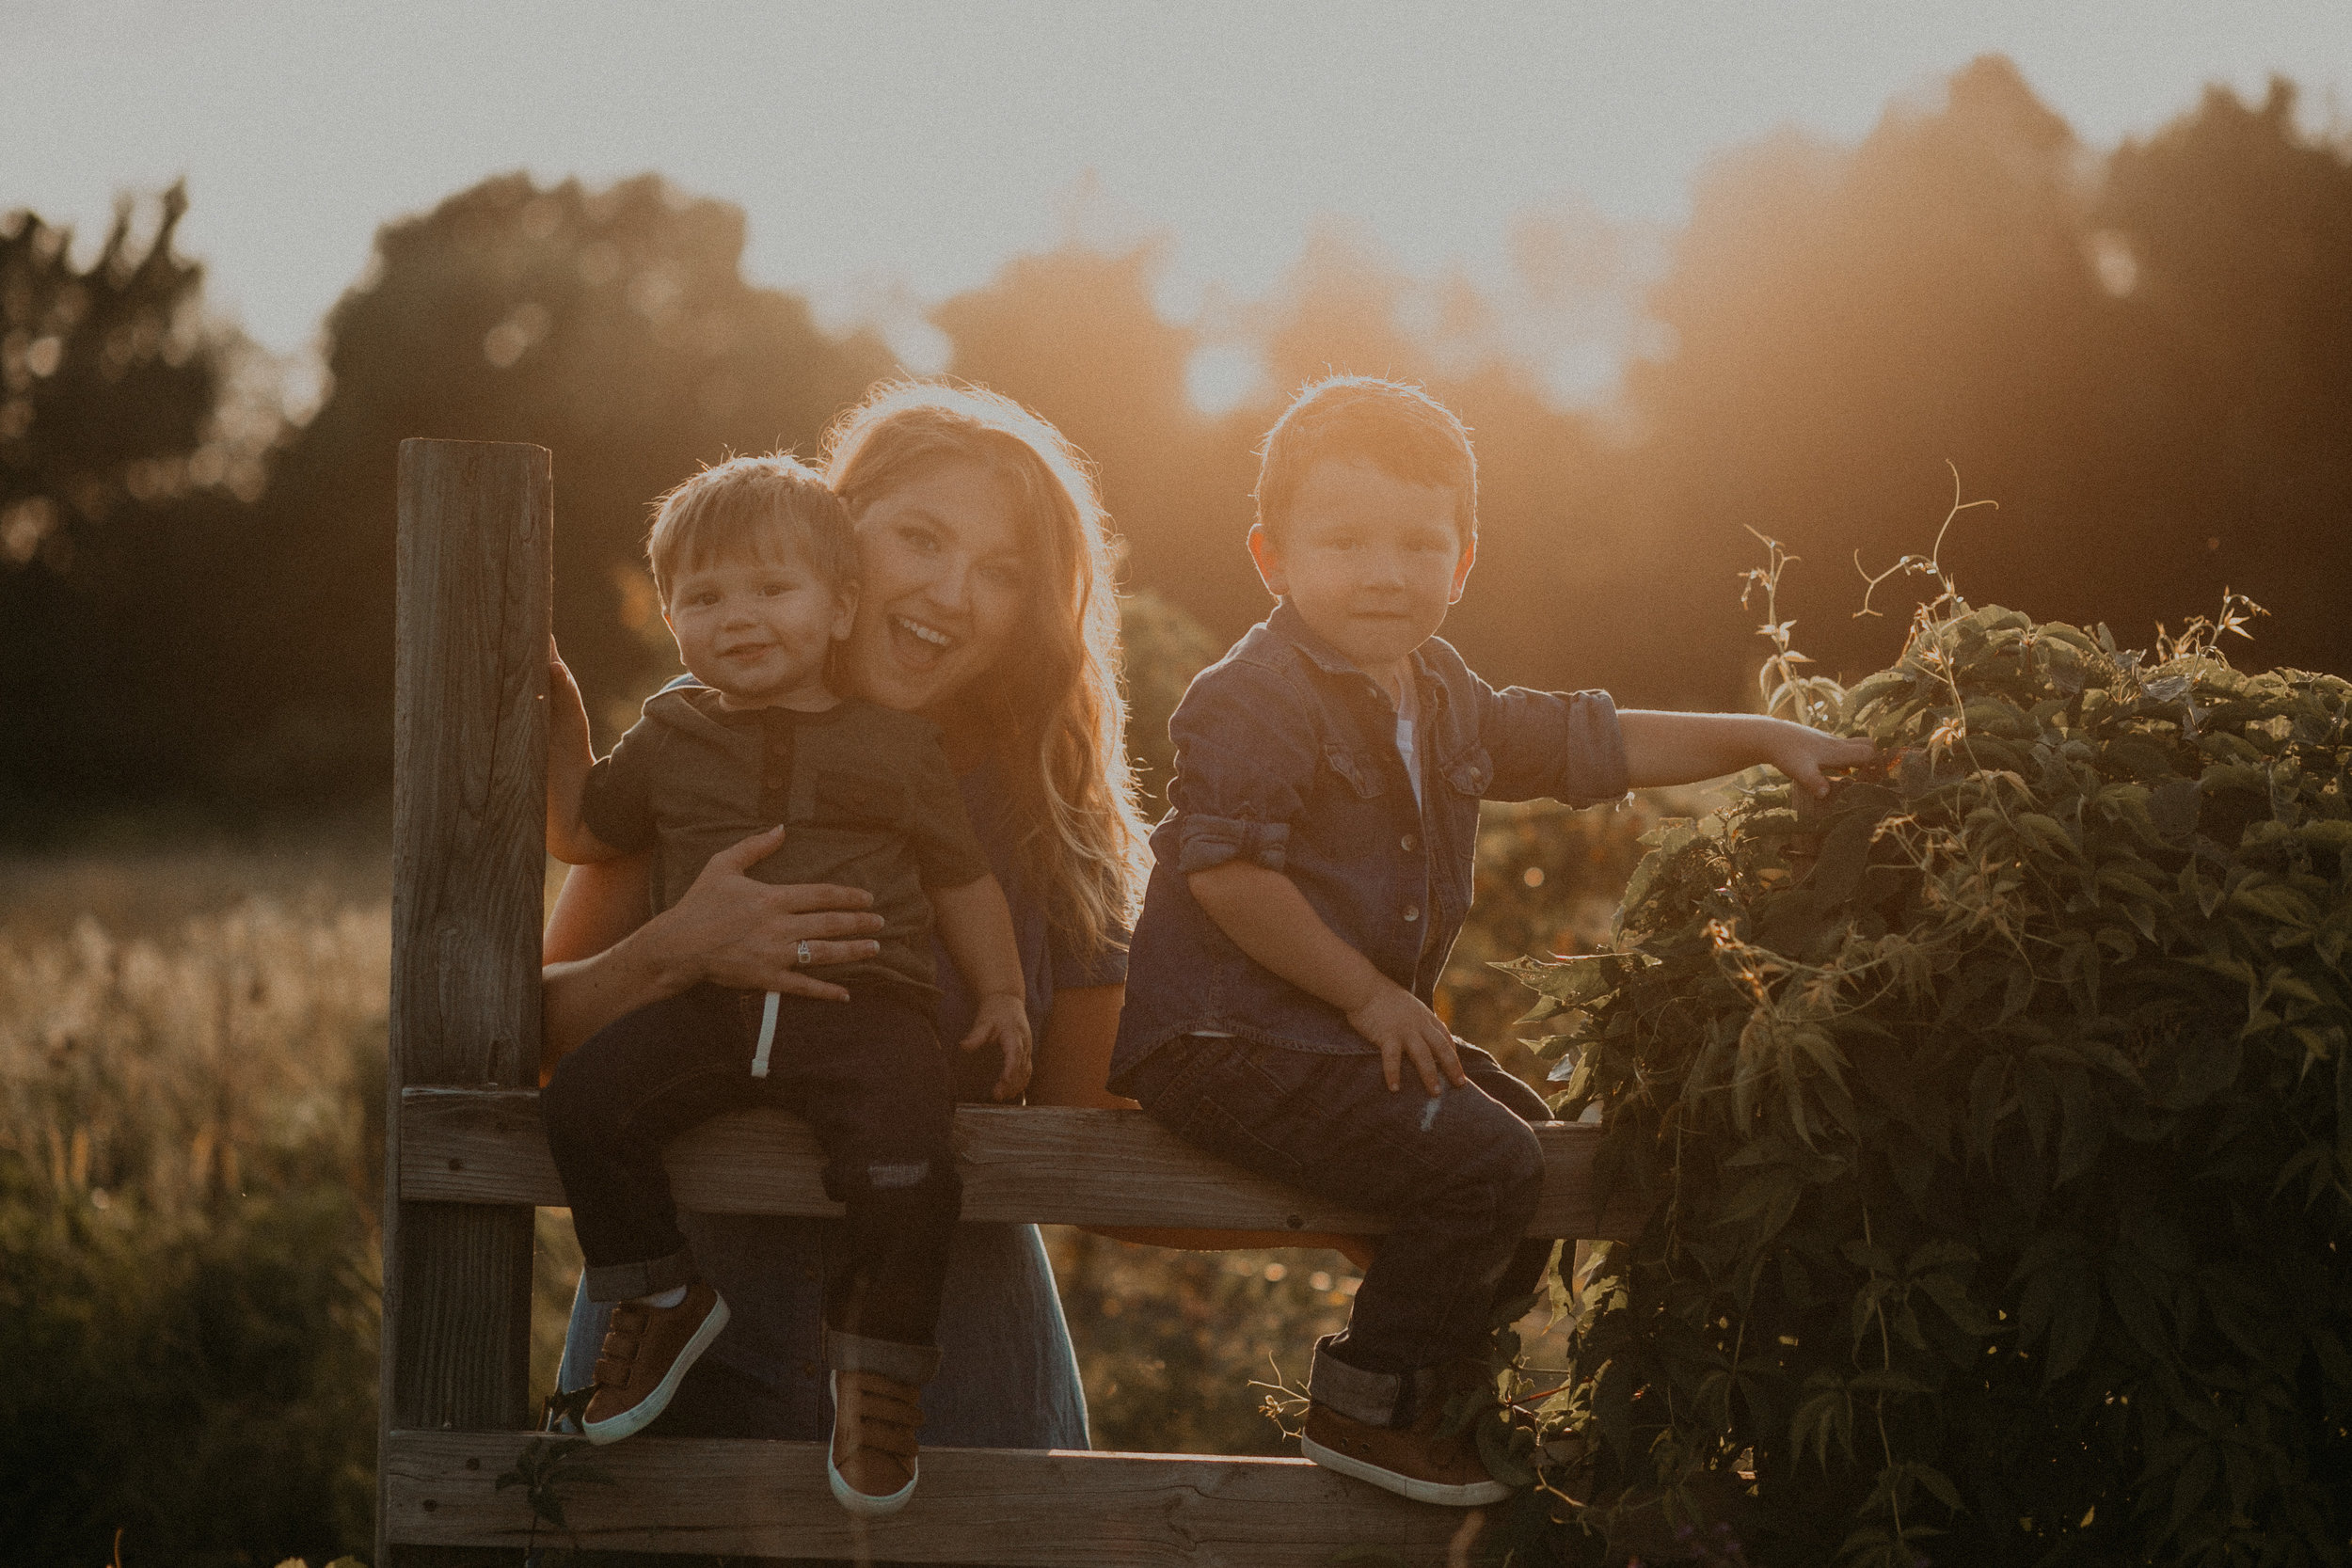  smiling mommy in River Falls Wisconsin during golden hour sunset holding sons 